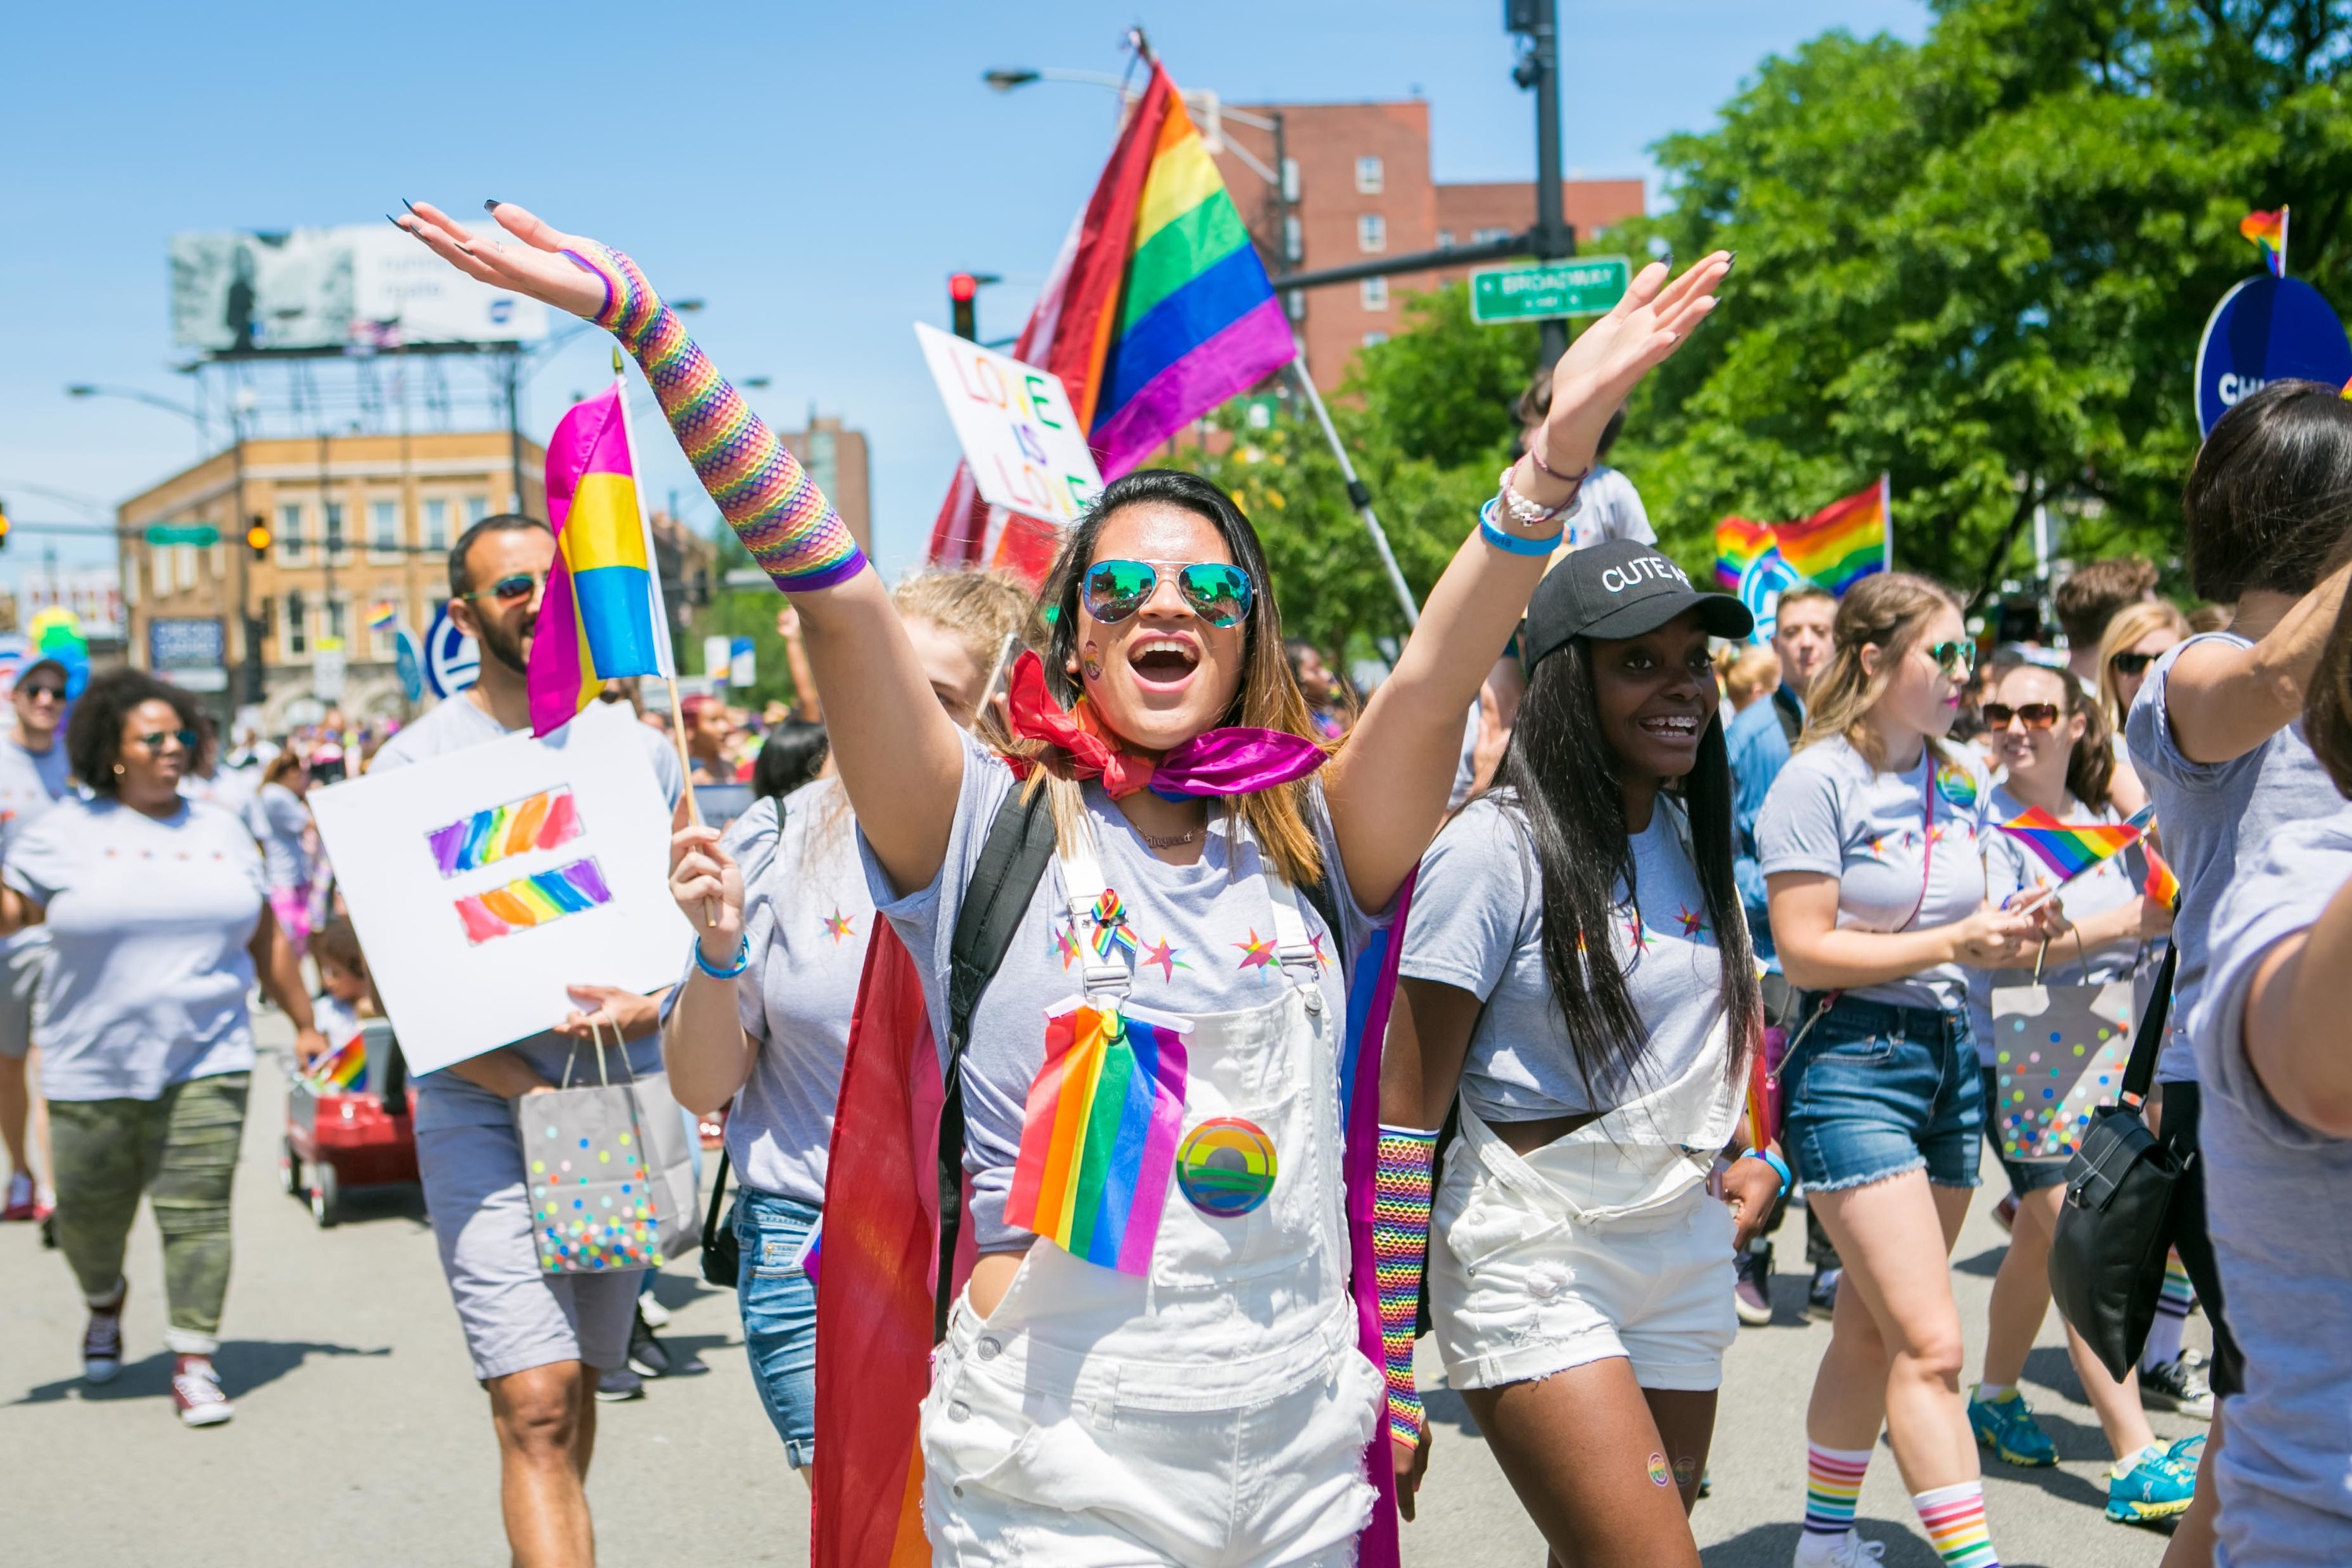 Check out photos from the Chicago Pride Parade